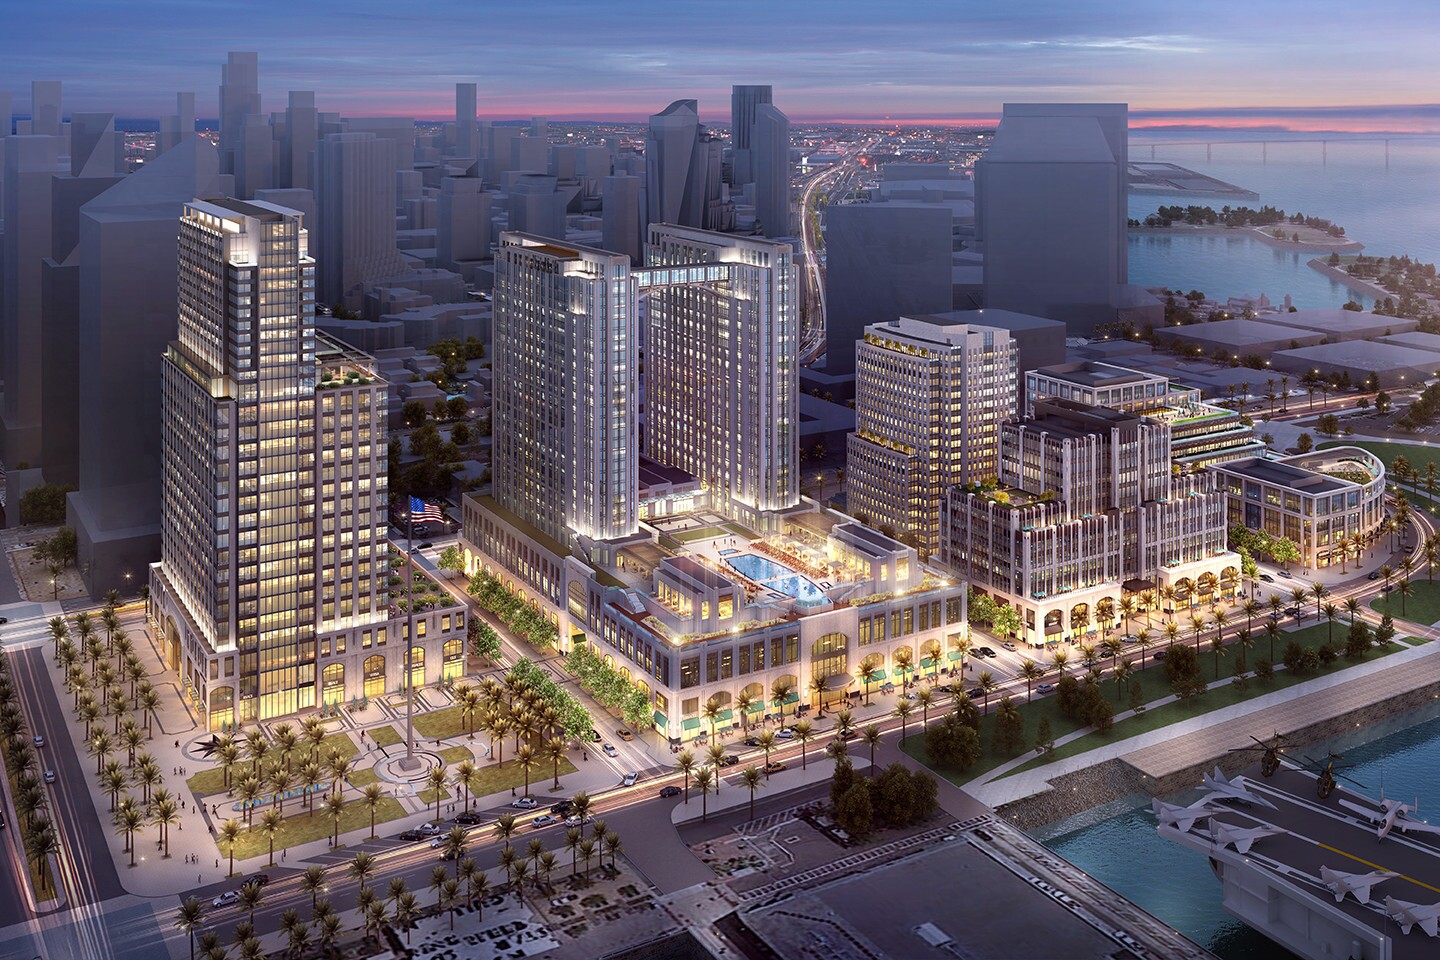 Manchester S 1 5b Waterfront Project Now Available For Lease The San Diego Union Tribune